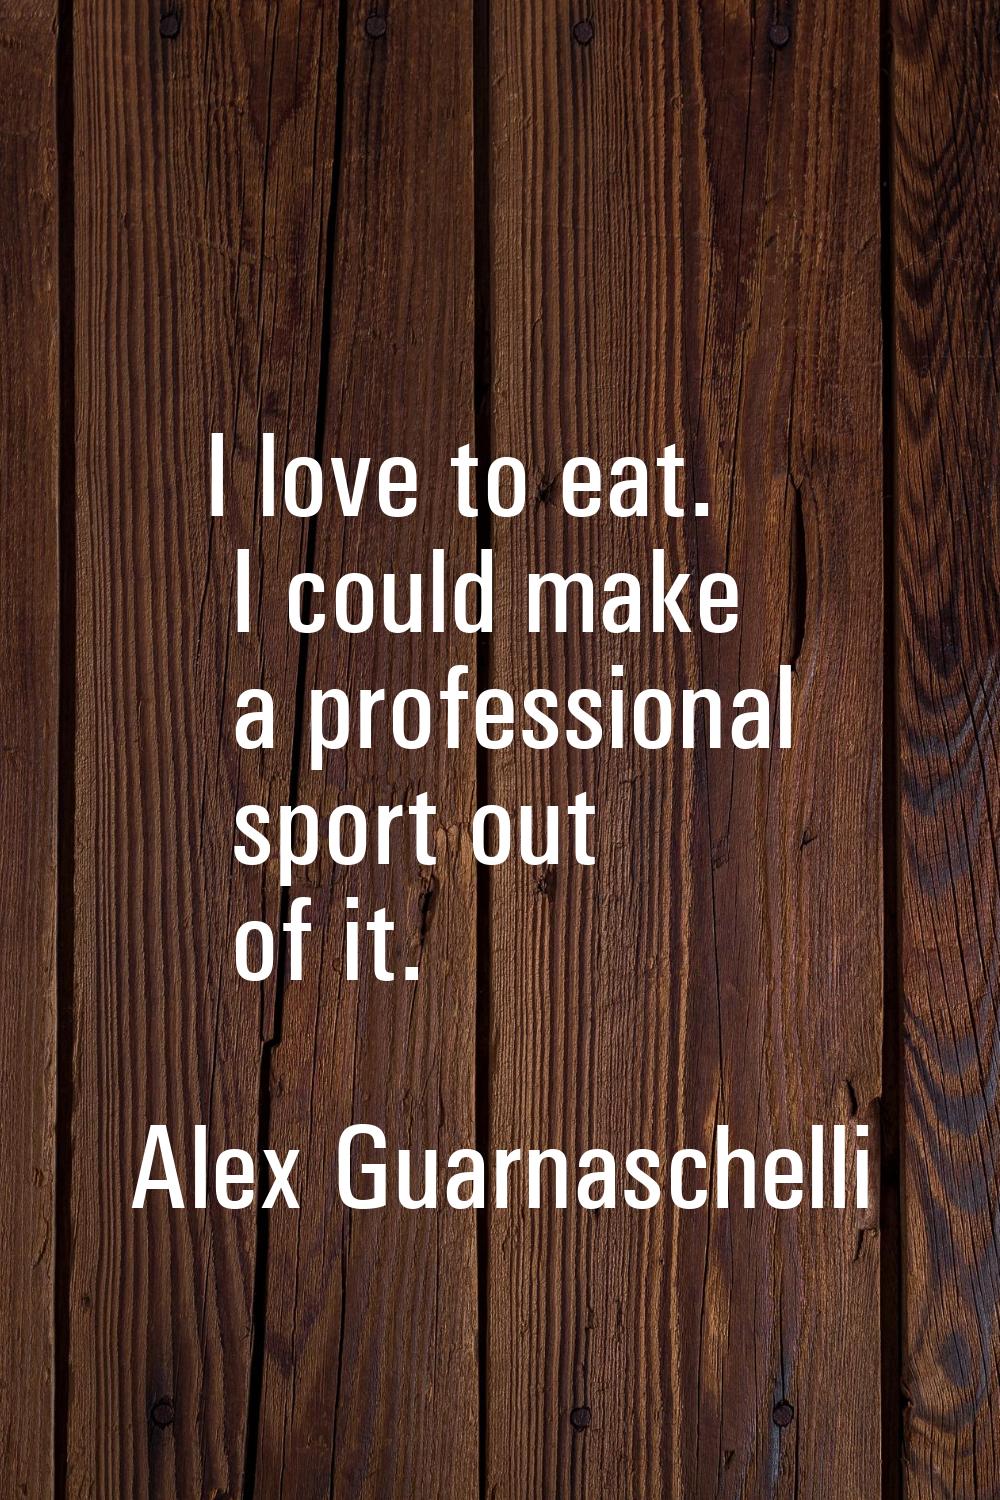 I love to eat. I could make a professional sport out of it.